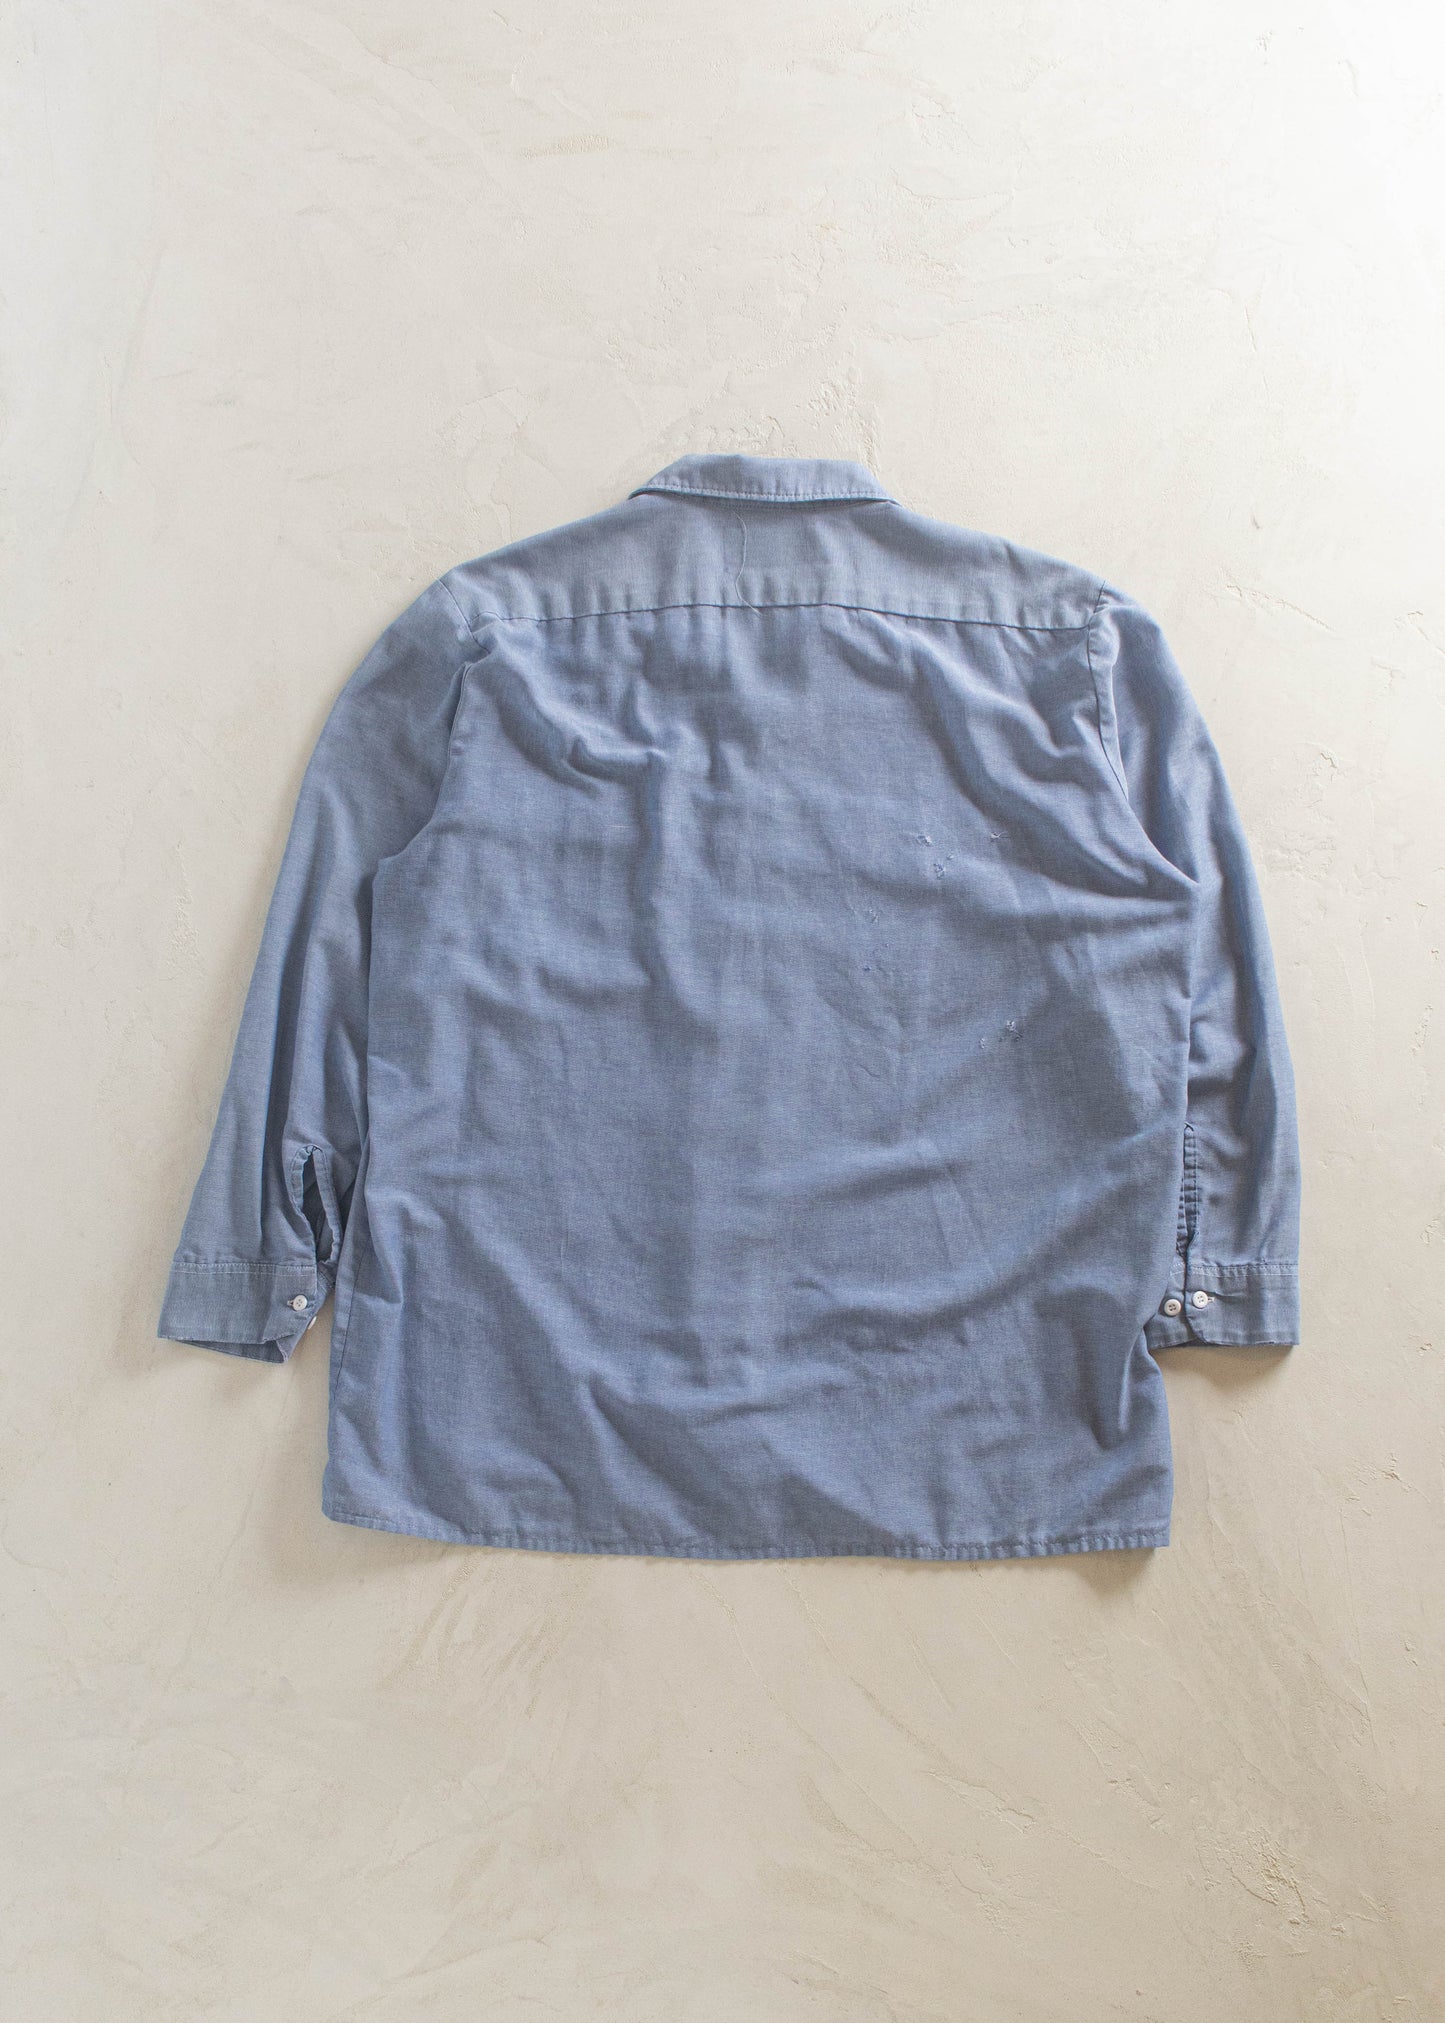 Dickies Chambray Long Sleeve Button Up Shirt Size XL/2XL